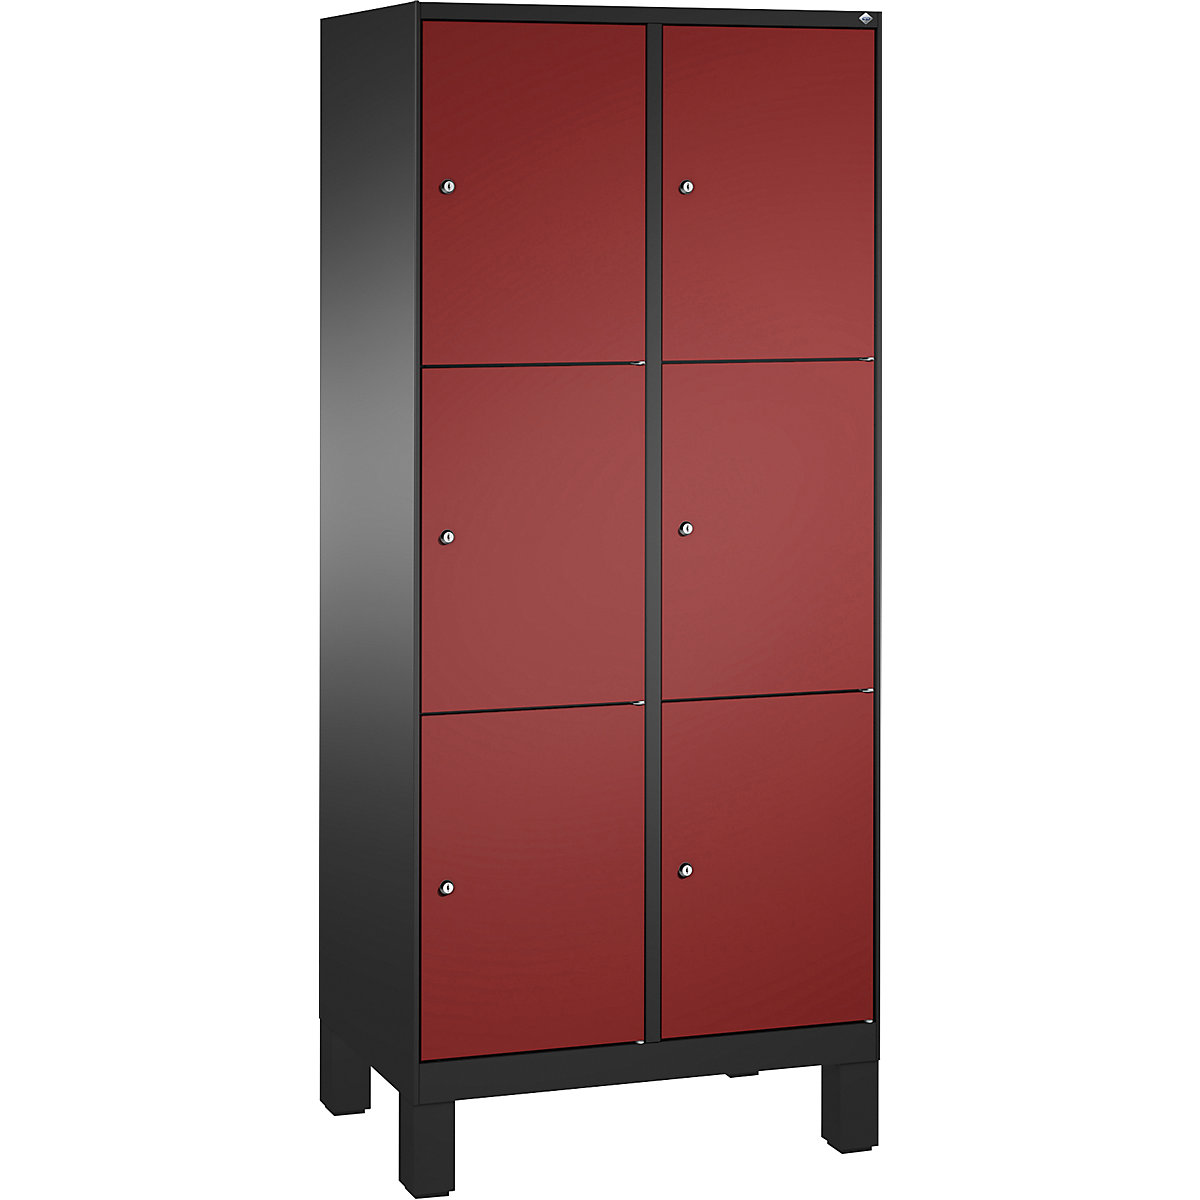 EVOLO locker unit, with feet – C+P, 2 compartments, 3 shelf compartments each, compartment width 400 mm, black grey / ruby red